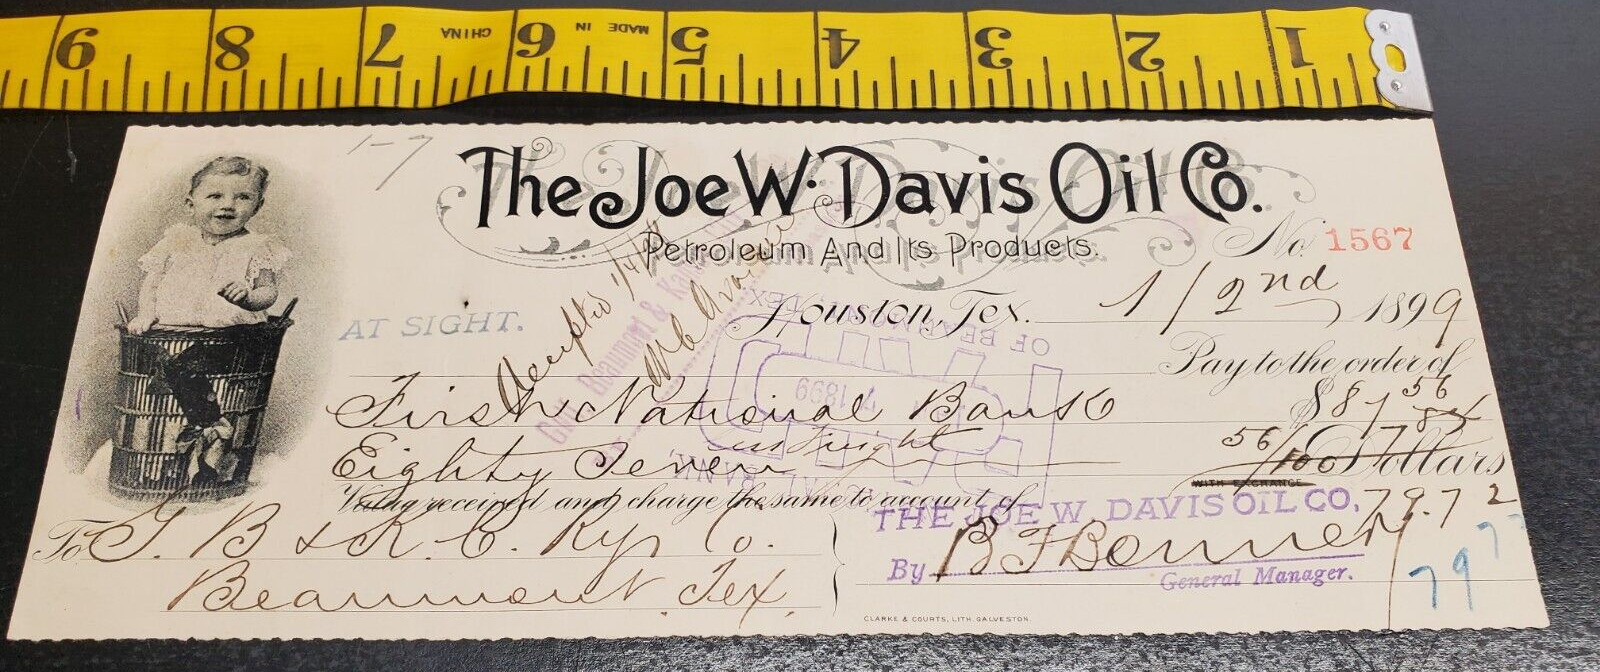 The Joe W. Davis Oil Co. Cancelled Check dated 1899 in Texas - Baby in a basket